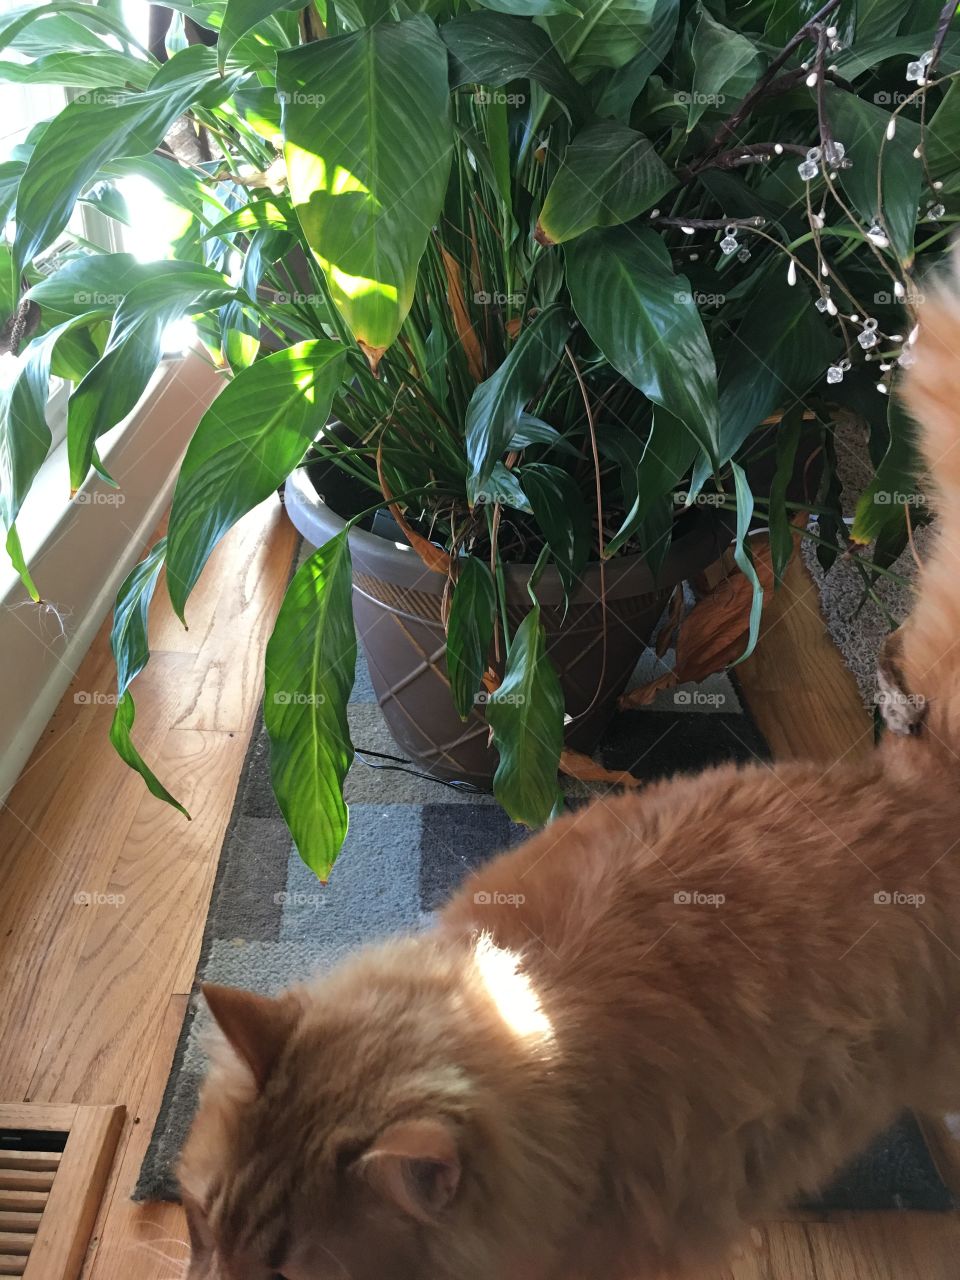 A beautiful, orange, long-haired cat (named Apollo) slightly out of frame next to a healthy green peace plant